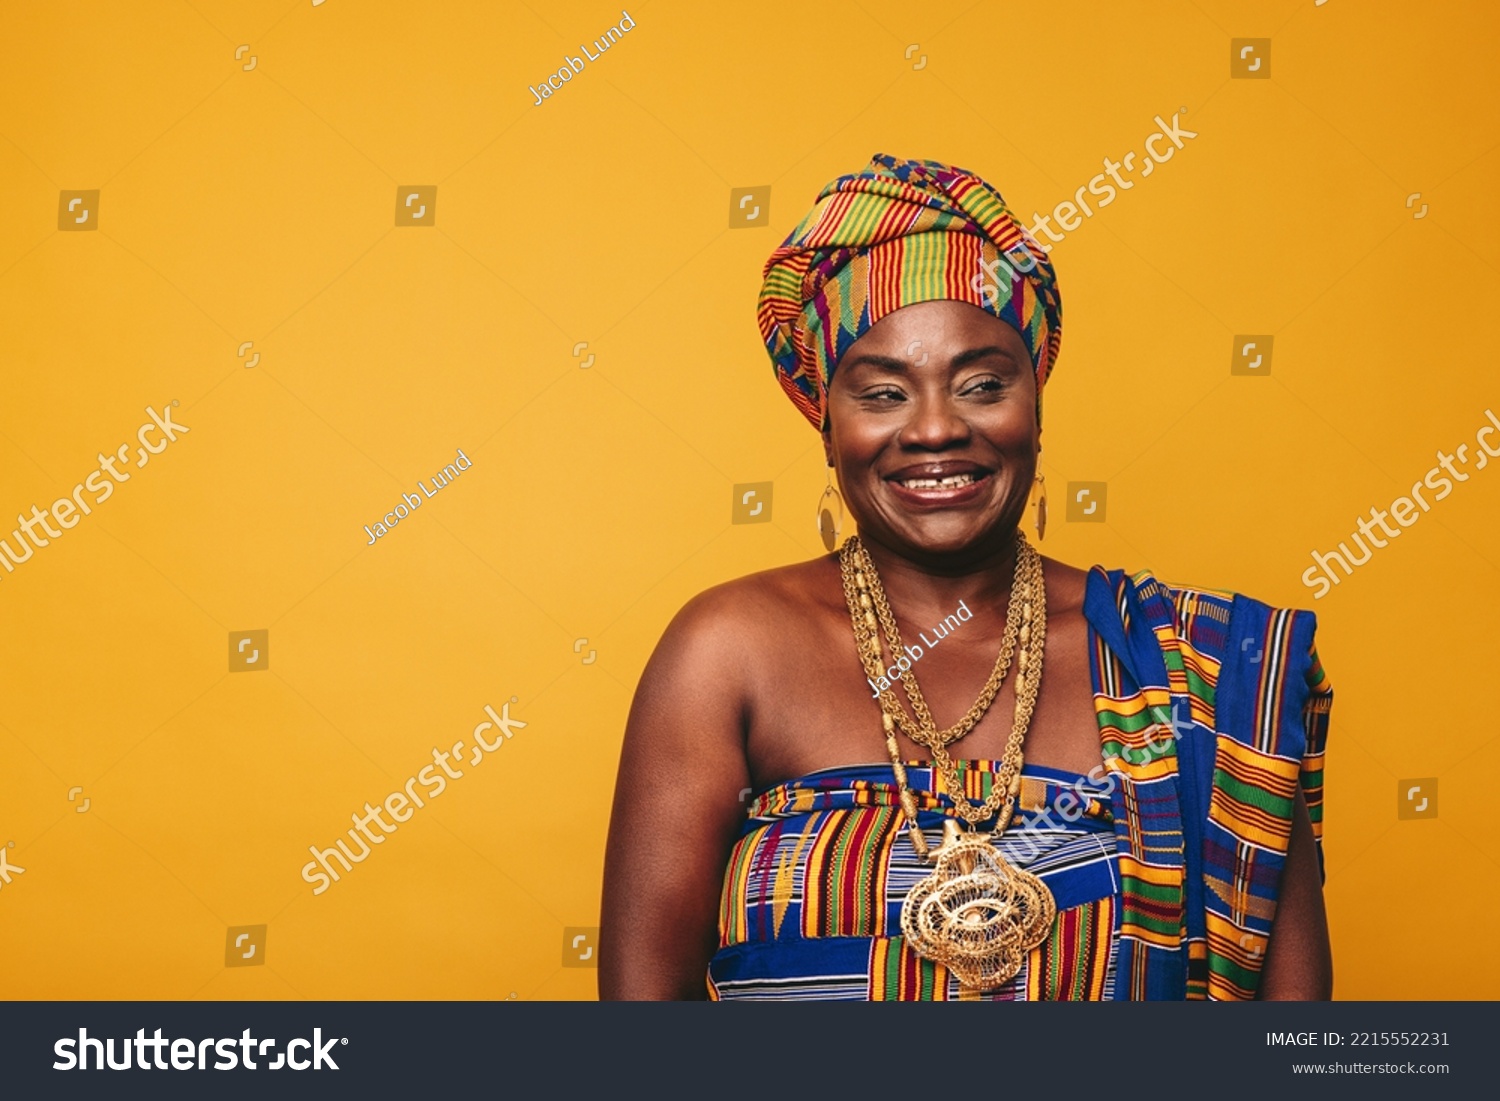 Smiling Ghanaian woman wearing a traditional attire against a yellow background. Happy black woman dressed in colourful Kente cloth and golden jewellery. Mature elegant woman embracing her rich cultur #2215552231